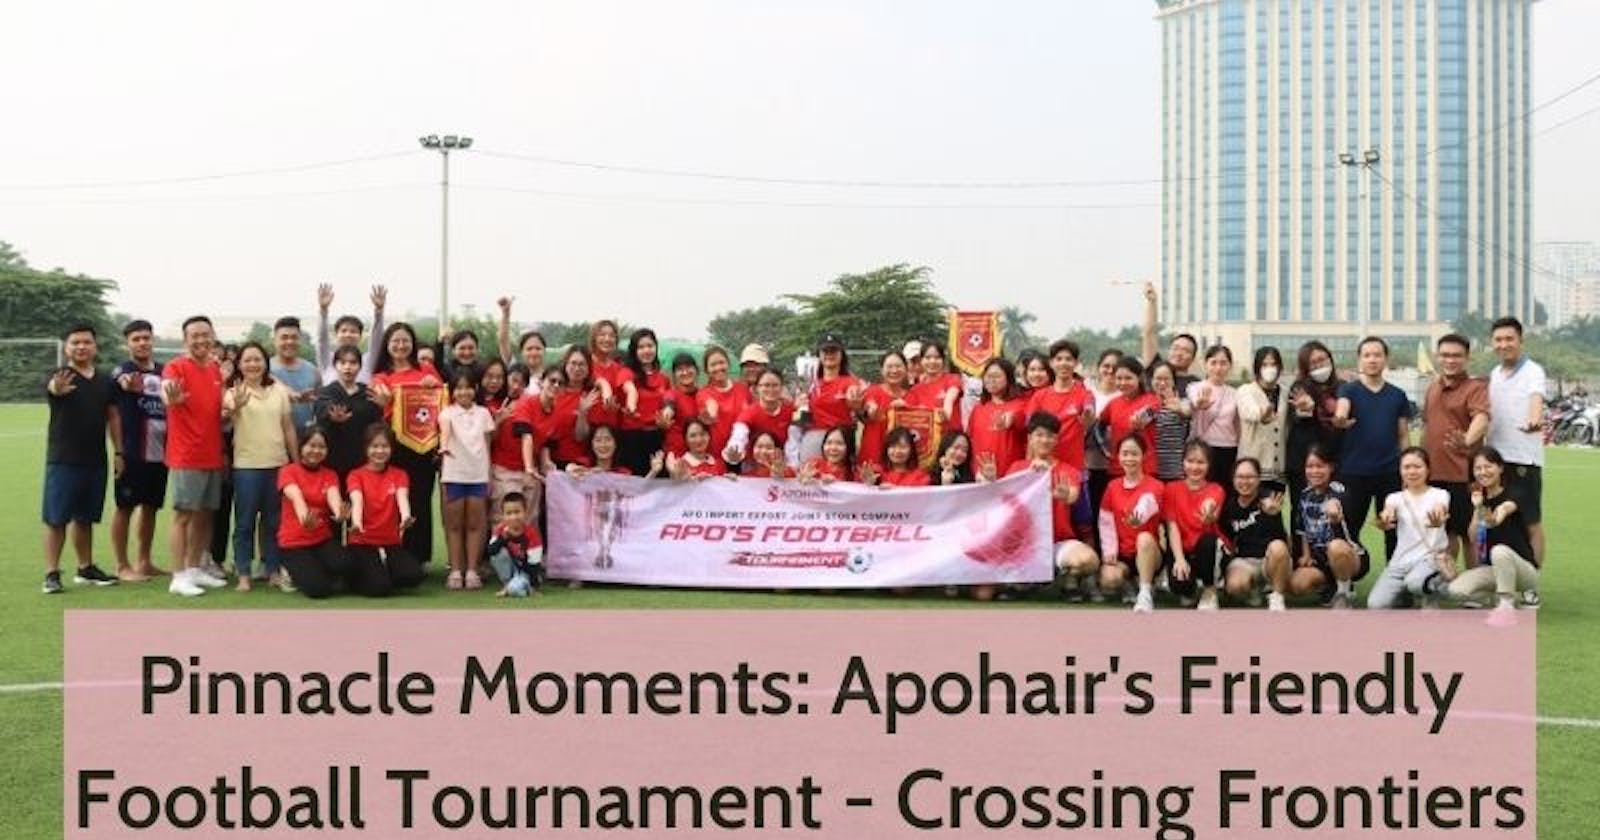 Apohair’s Friendly Football Tournament – Crossing Frontiers